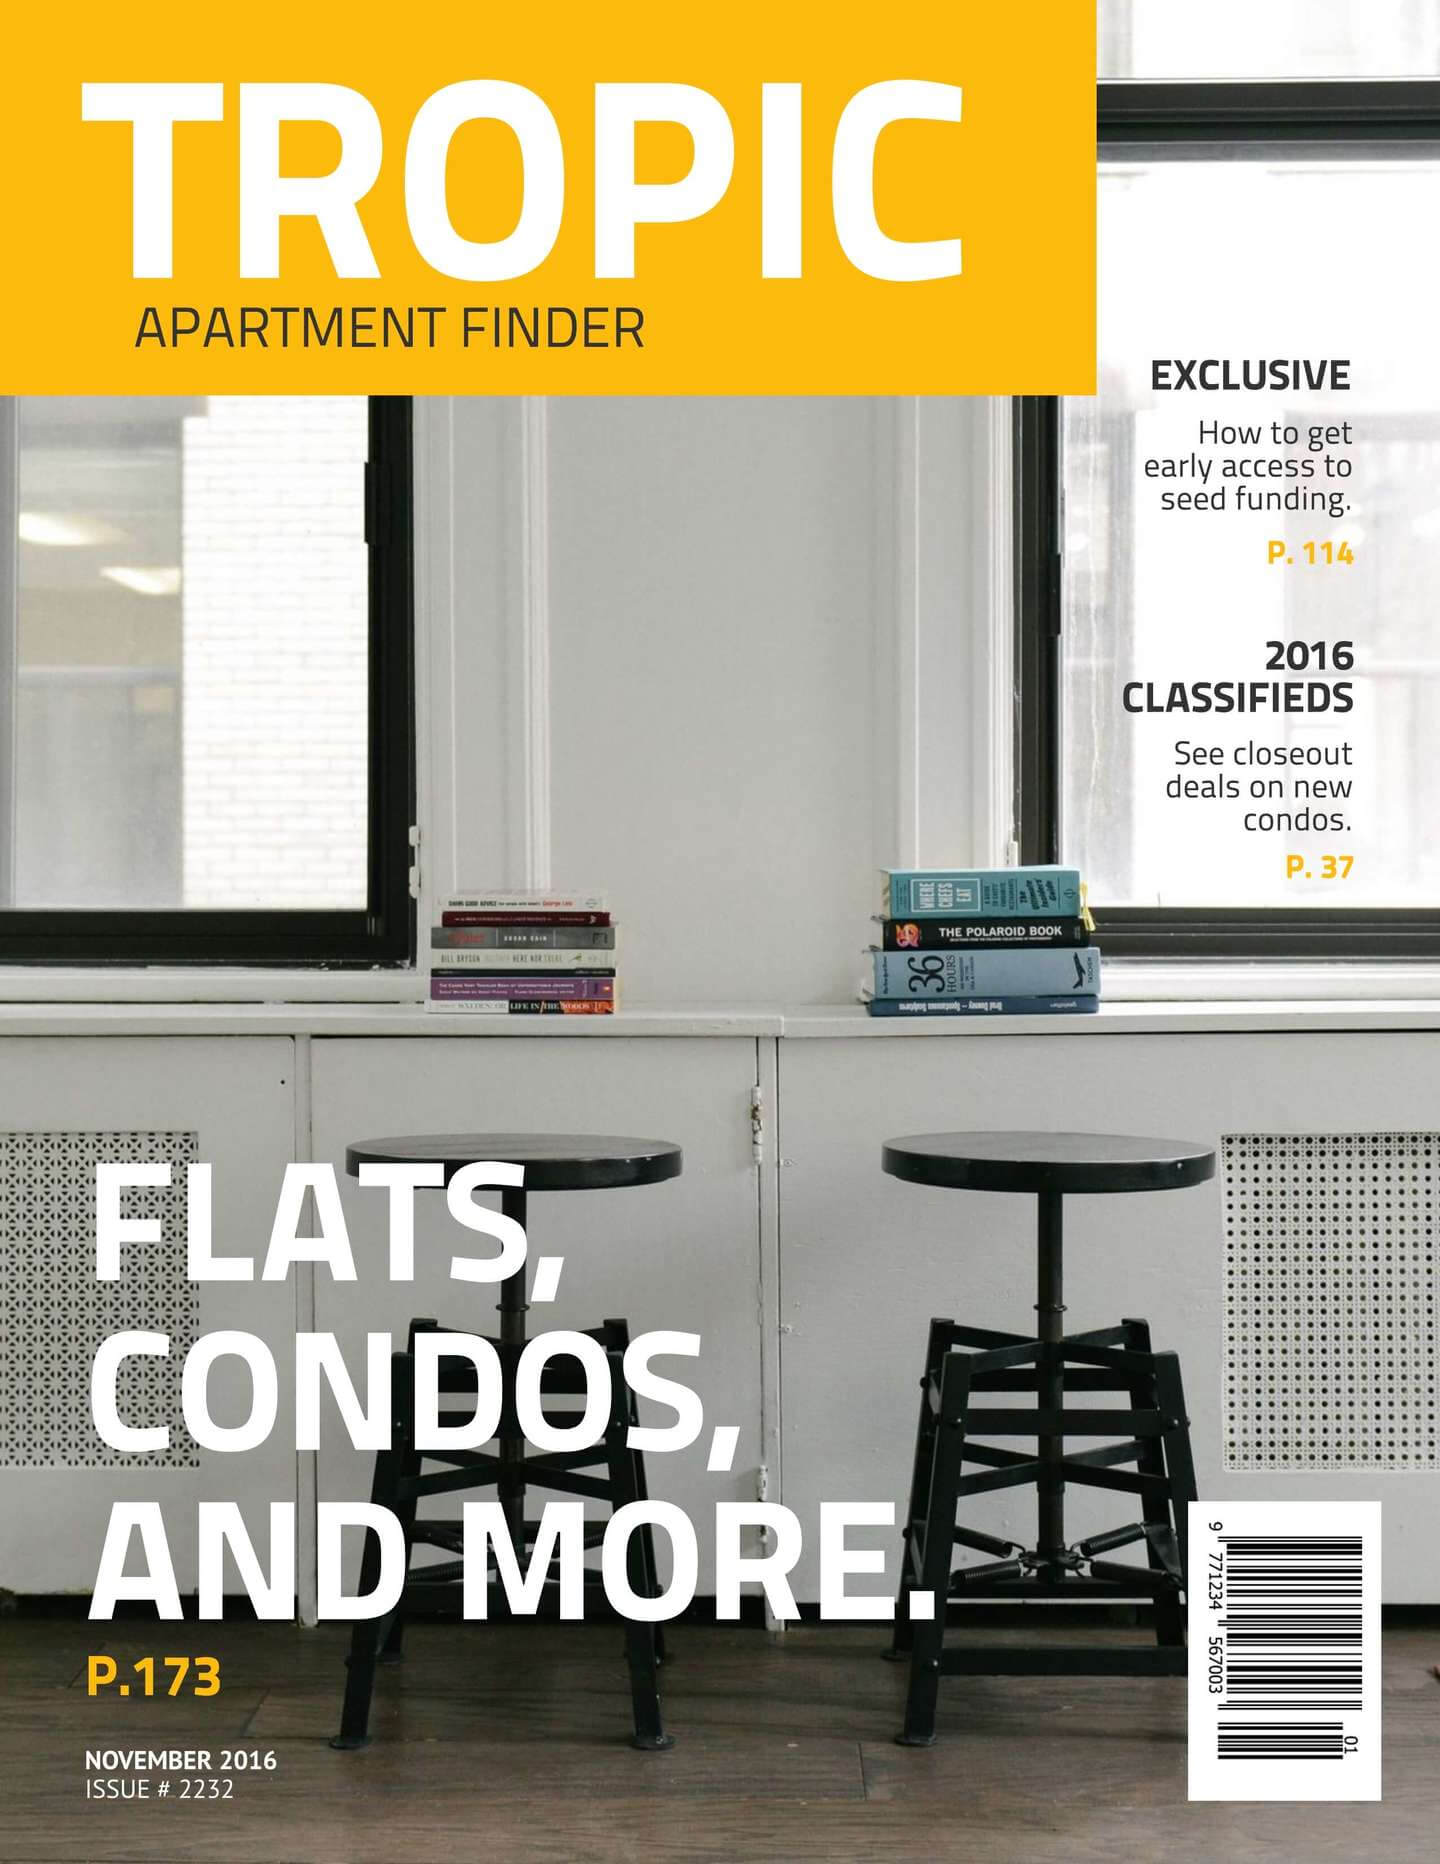 Free Magazine Templates + Magazine Cover Designs Intended For Magazine Template For Microsoft Word